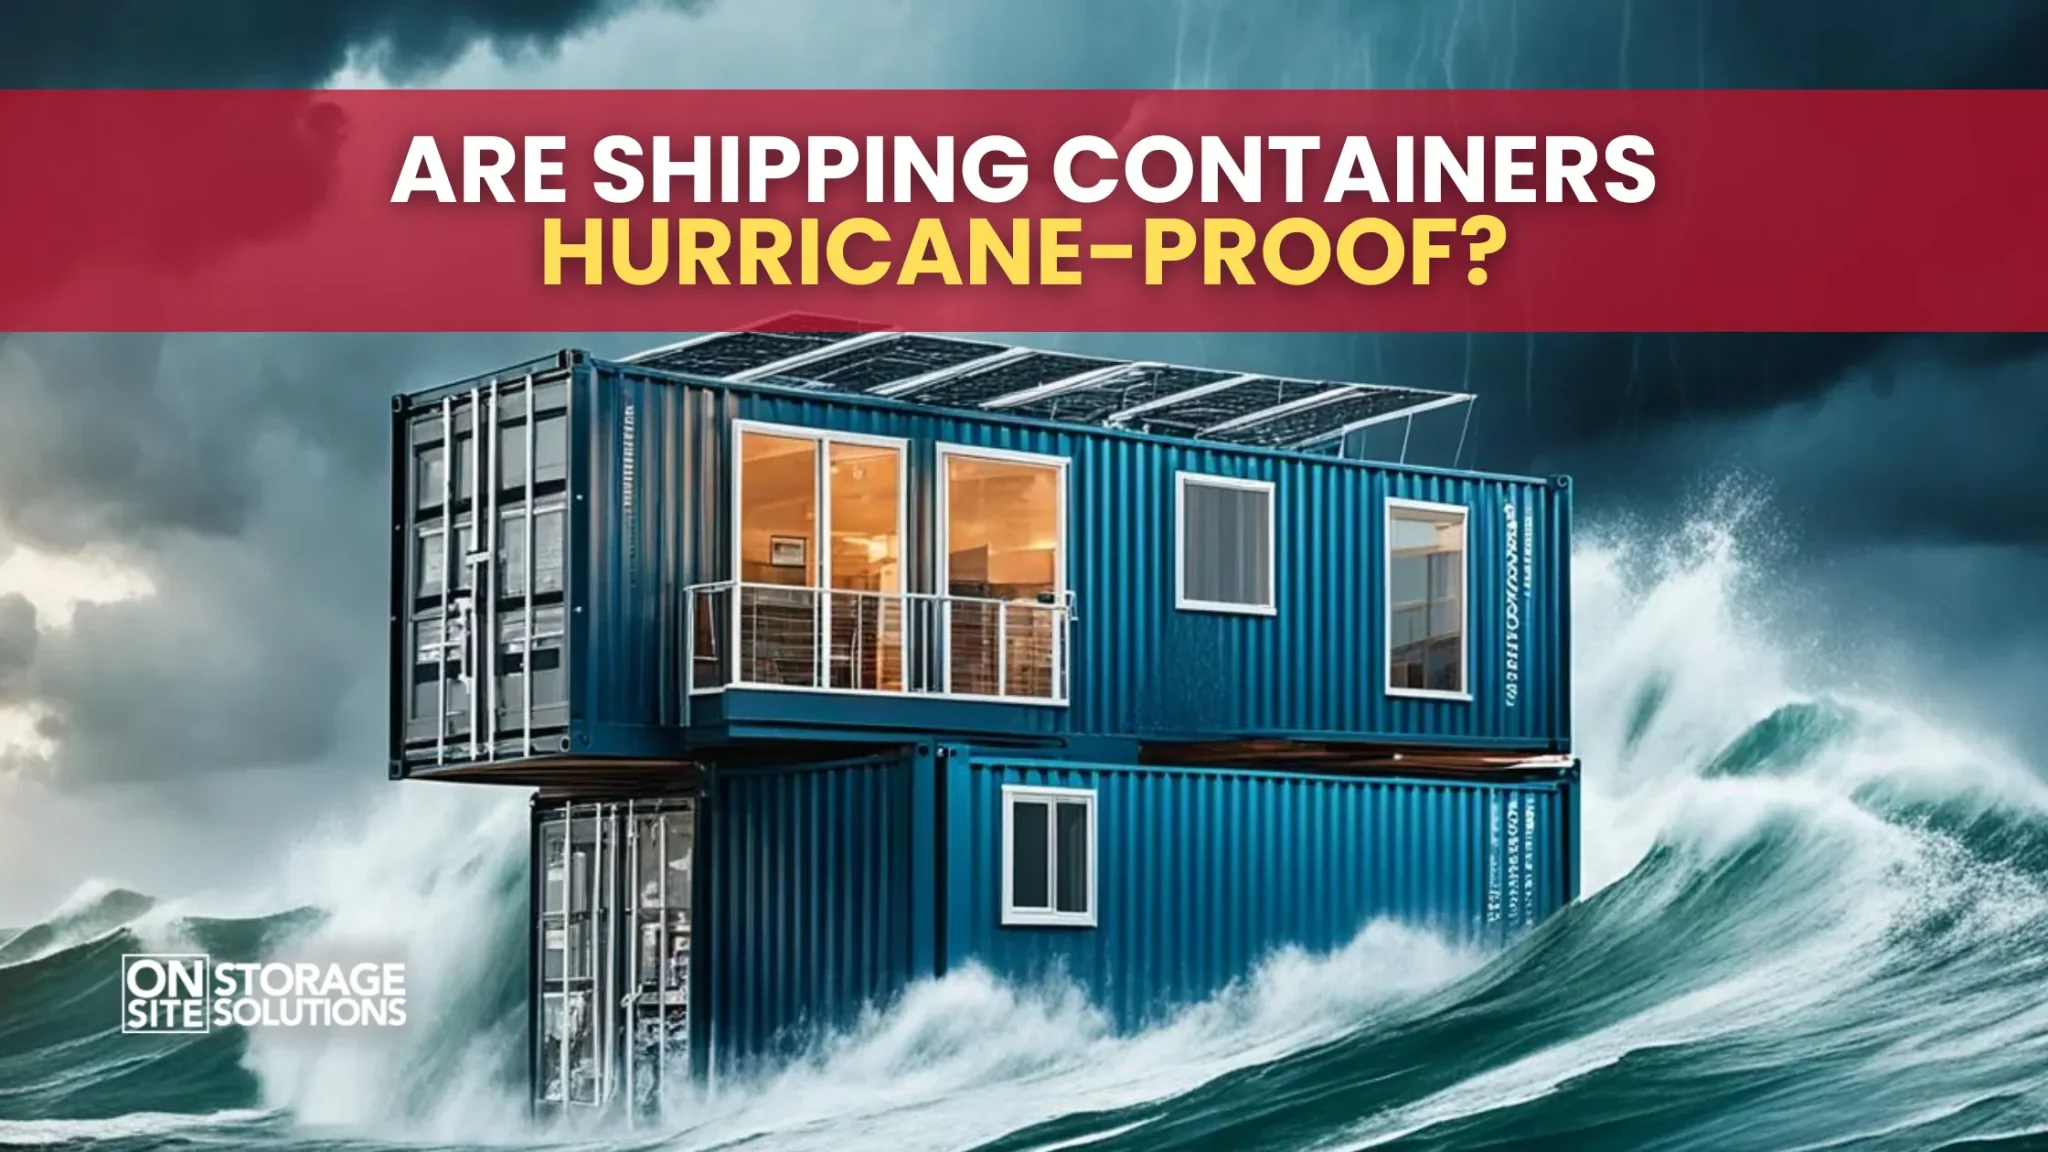 Are Shipping Containers Hurricane-Proof?